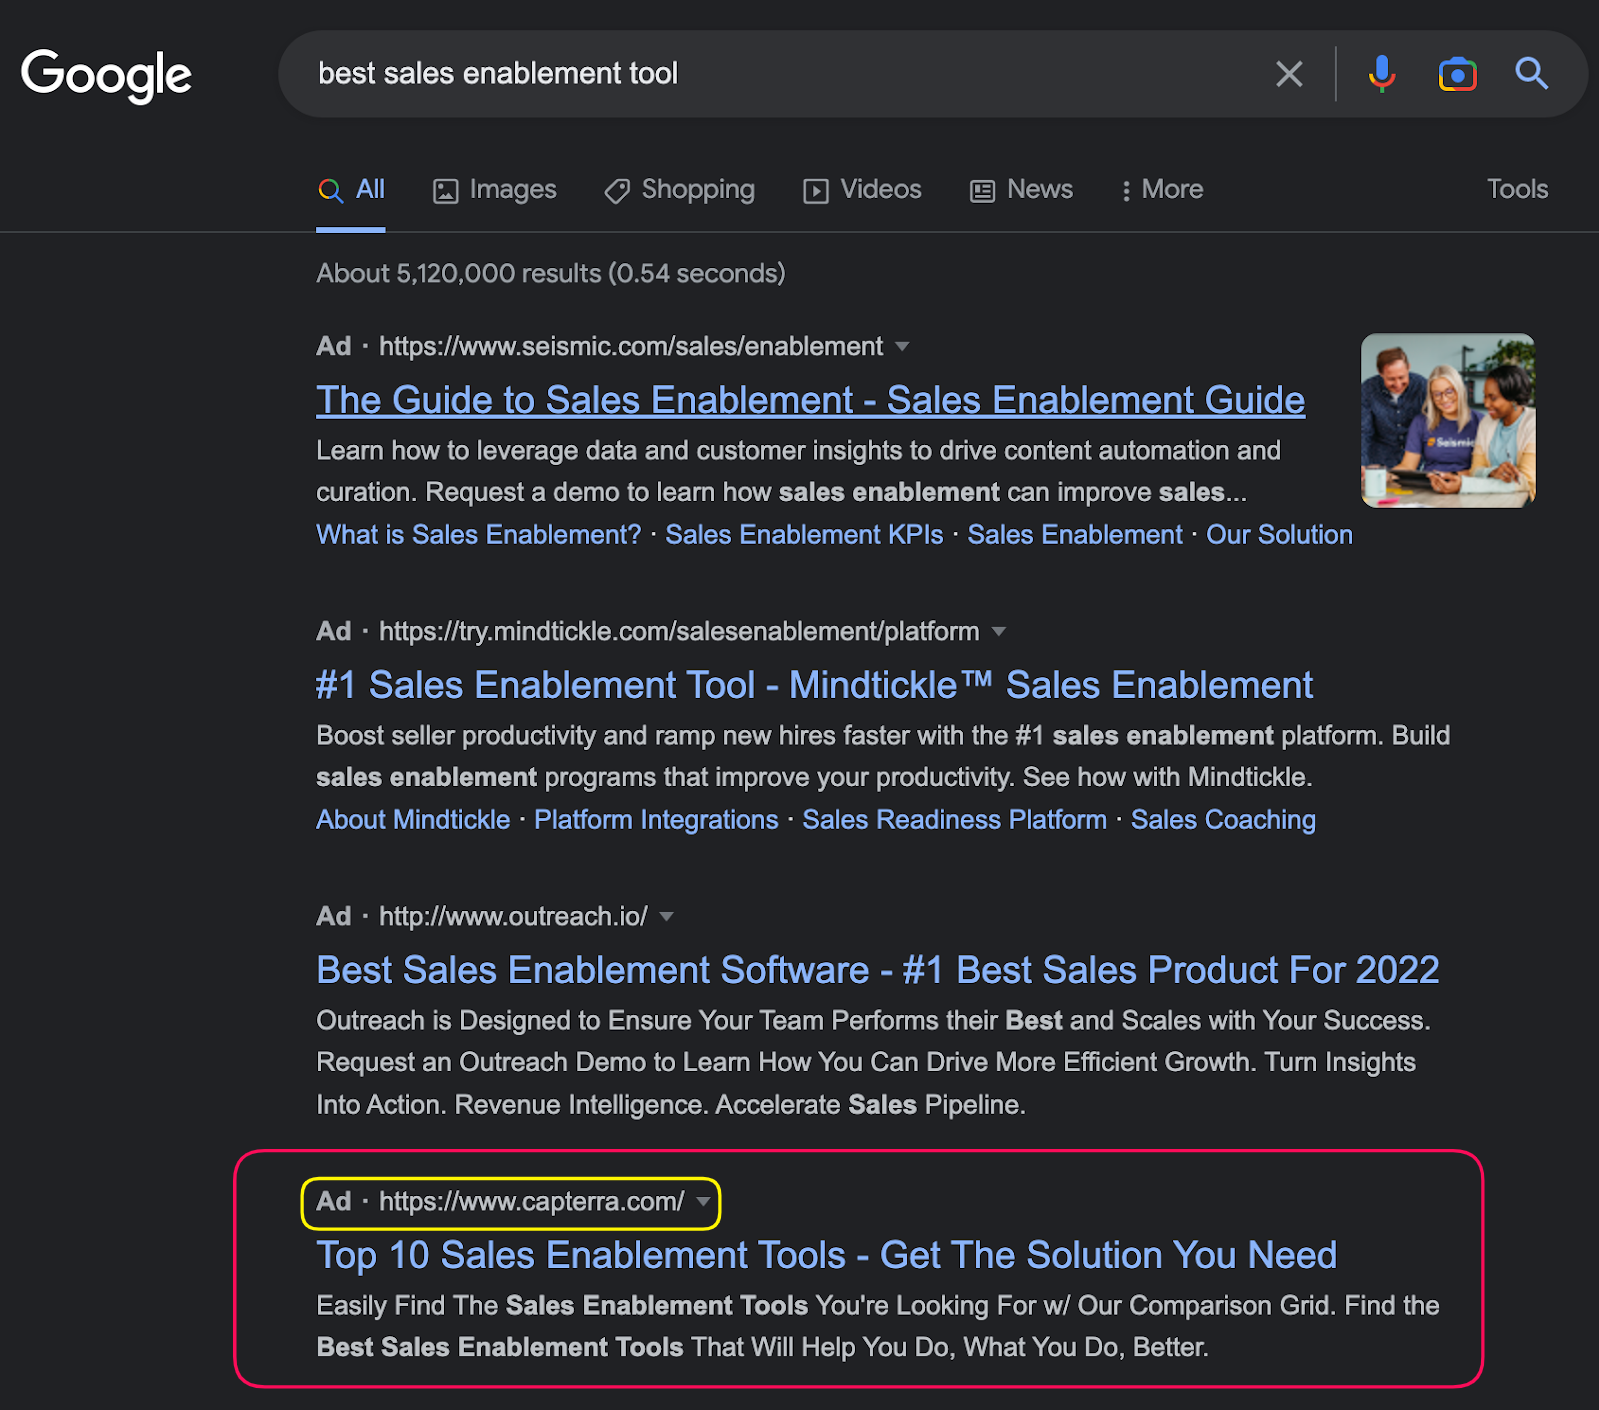 screenshot of google search results page for the term "best sales enablement tools", with the final result highlighted